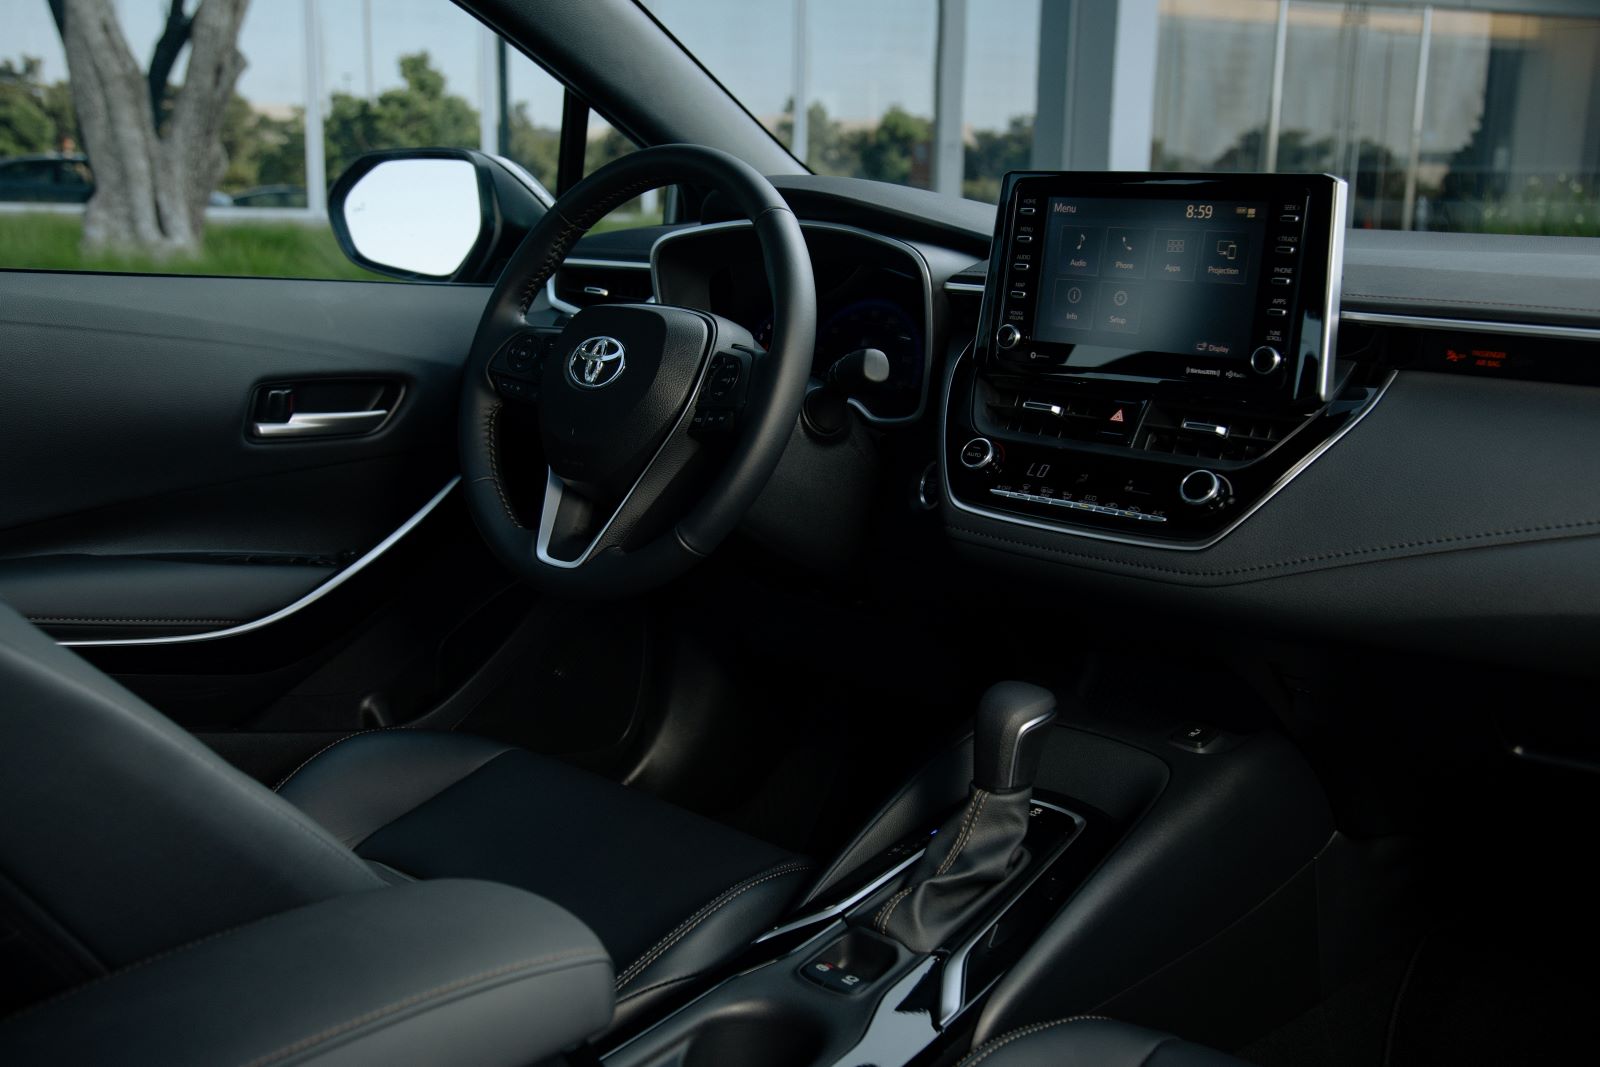 Interior photo of a 2022 Toyota Corolla, one of the best rental cars